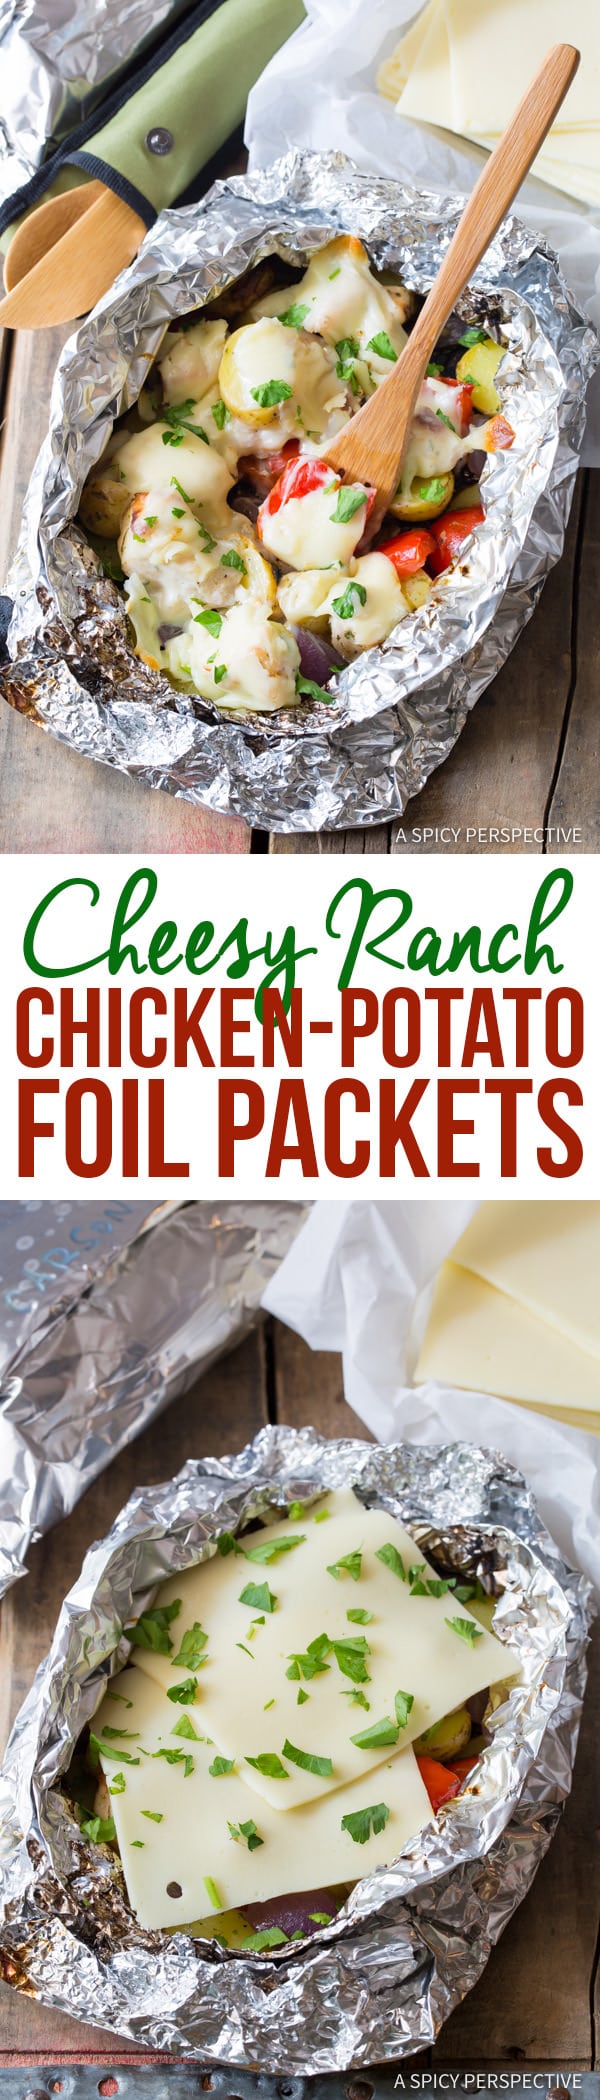 Easy Cheesy Ranch Chicken Potato Foil Packets - Great for Camping, Tailgating, & Picnics! 